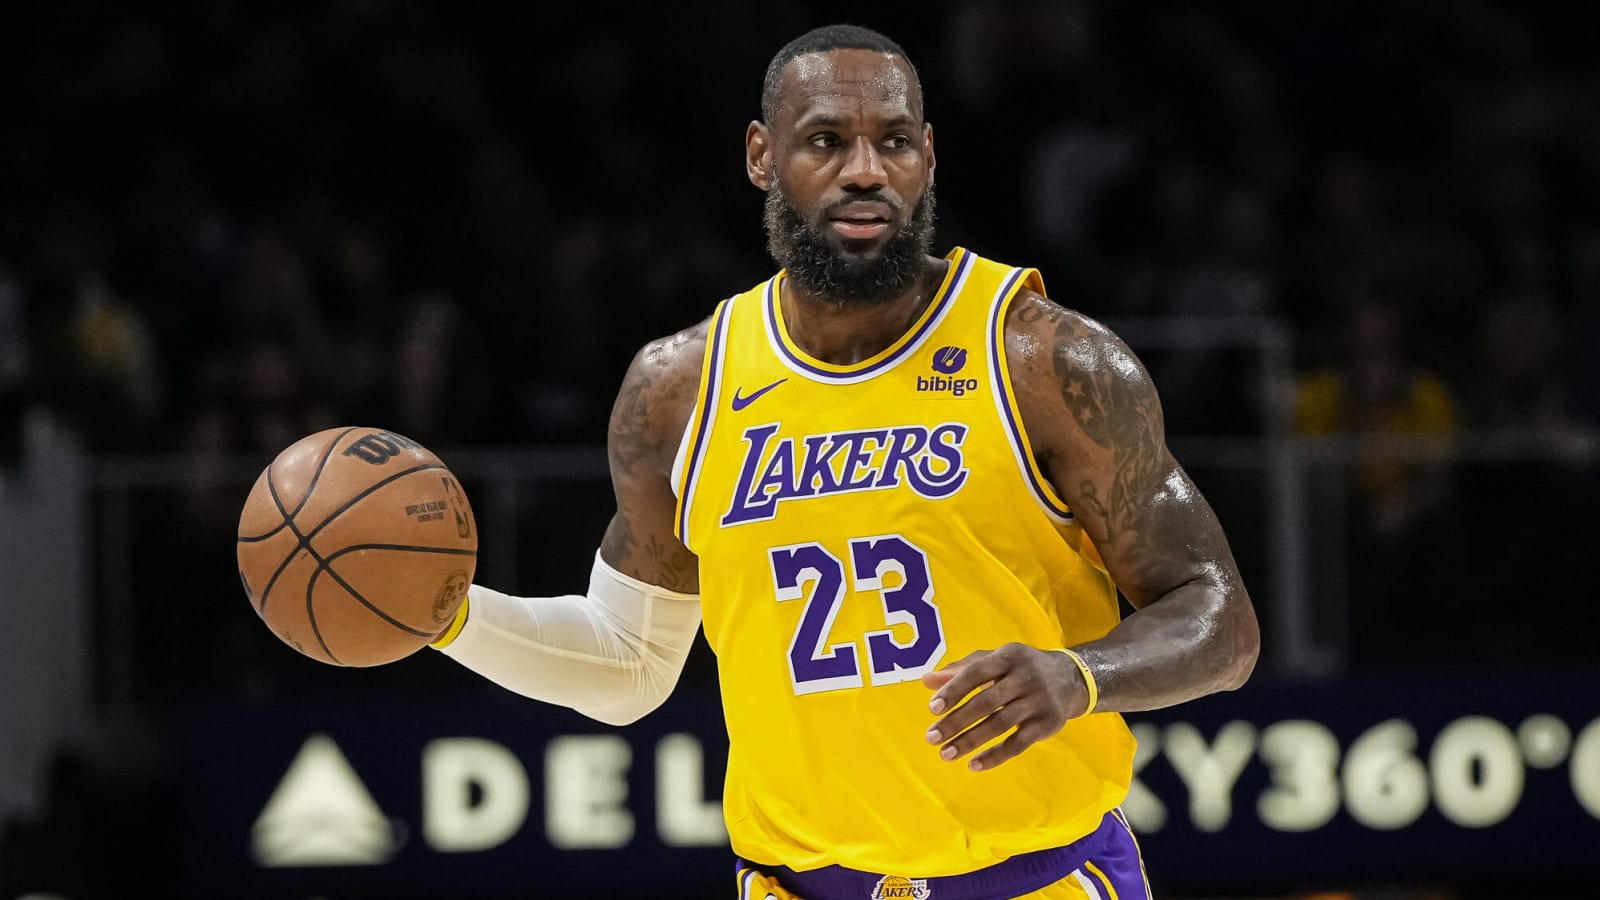 Report: Lakers’ LeBron James Hopes Ankle Treatment Will Enable Him To Finish Season Stronger